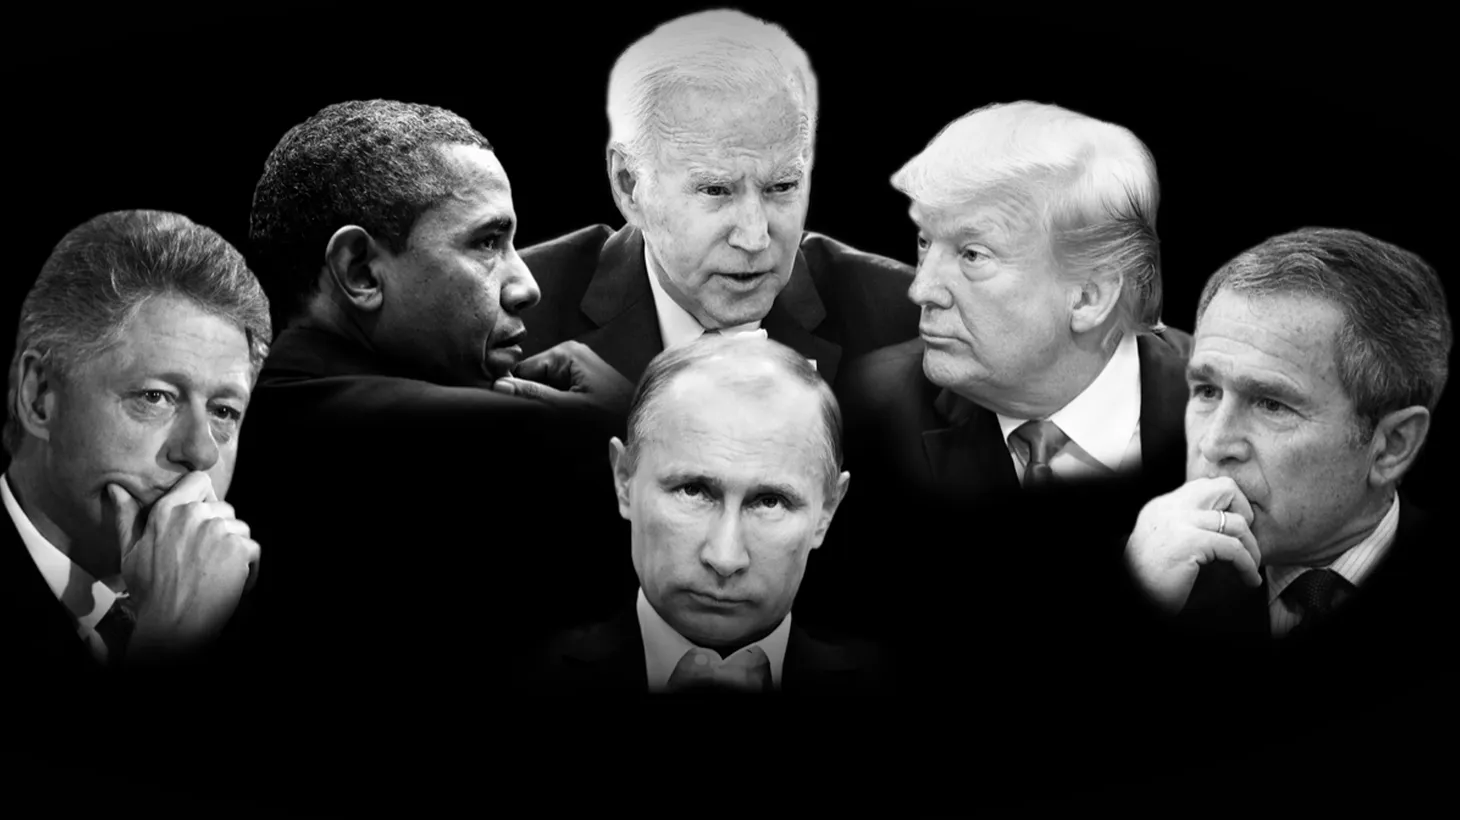 “Putin and the Presidents” explores why American presidents, dating back to Bill Clinton, have declined to aggressively confront Putin, and why it sets the state for his invasion of Ukraine.